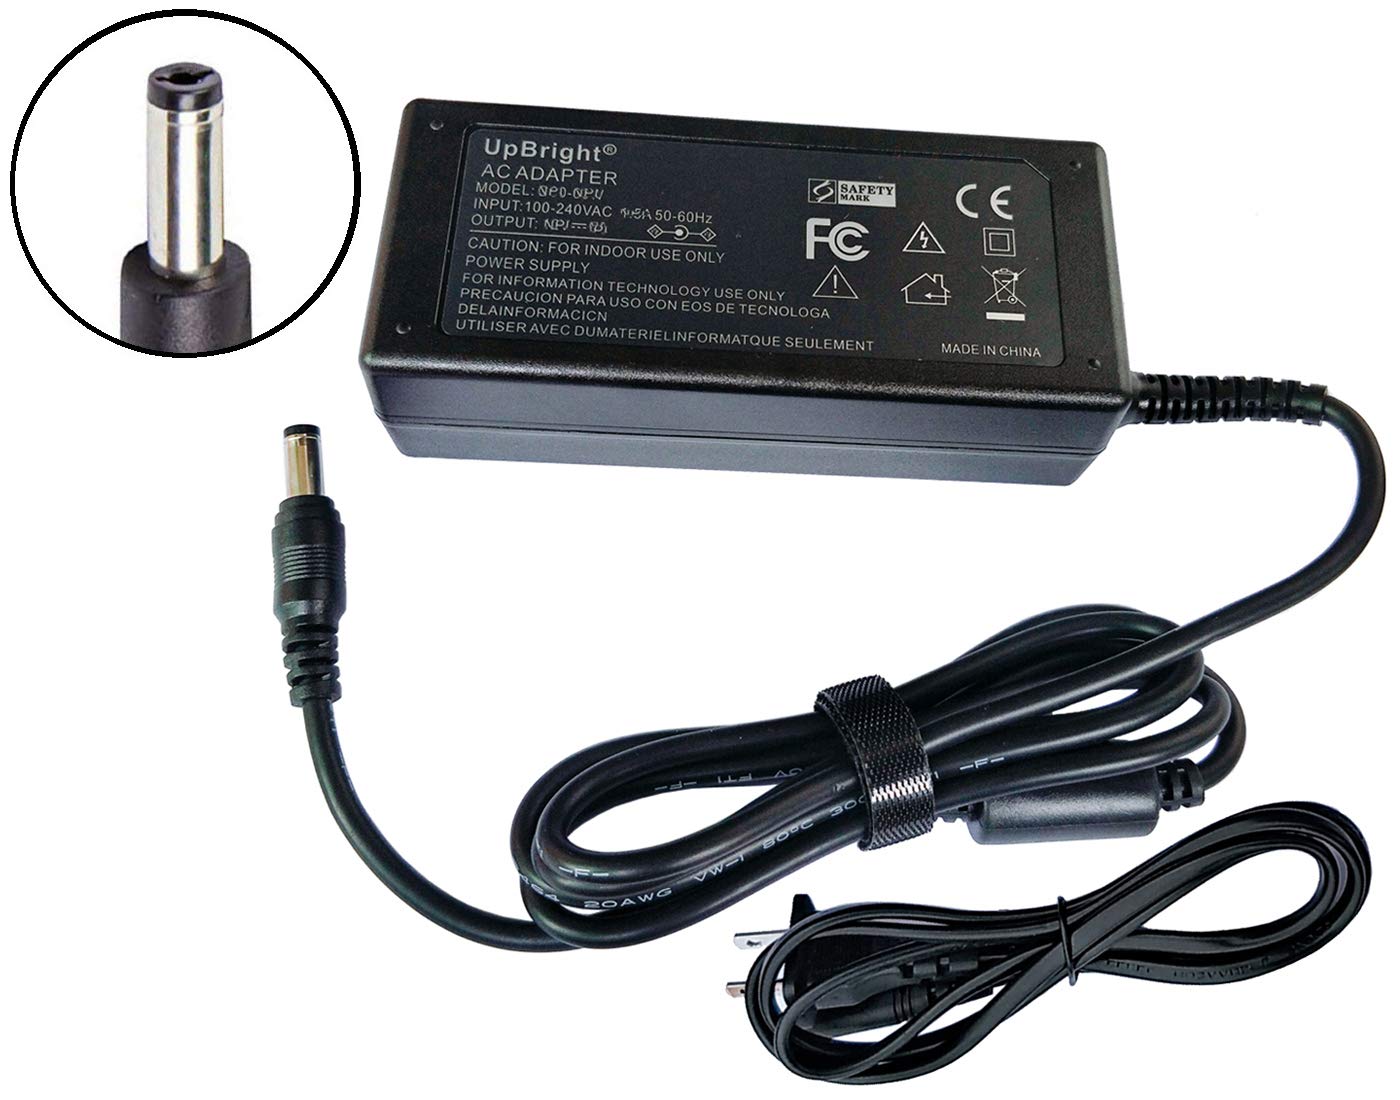 UpBright 15V AC/DC Adapter Compatible with Tenergy T320 59148 59148-01 59148-02 Portable Power Station 300Wh Backup Lithium Battery Solar Generator 15VDC 3A Power Supply Cord Cable Charger Mains PSU